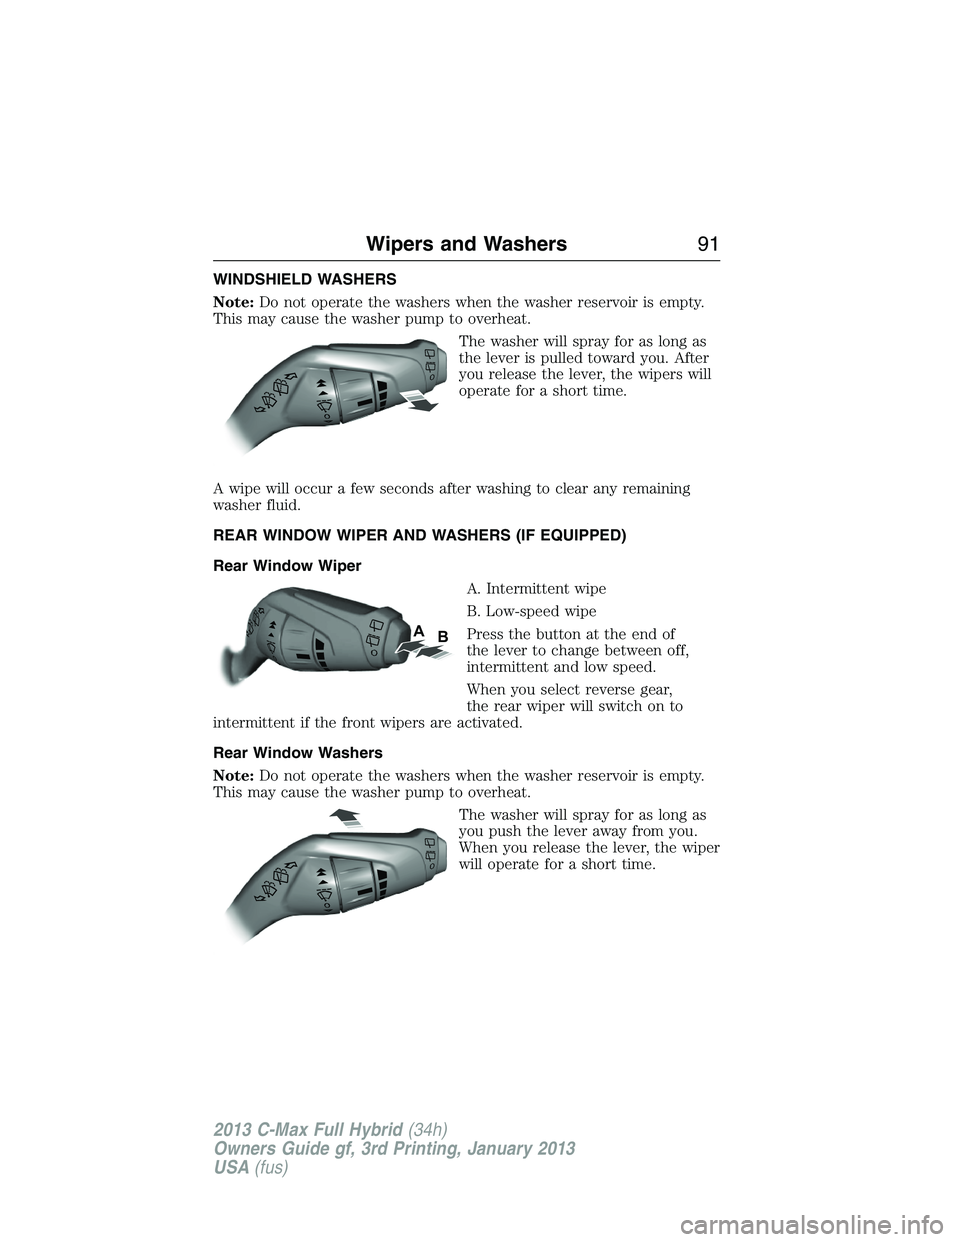 FORD C MAX 2013  Owners Manual WINDSHIELD WASHERS
Note:Do not operate the washers when the washer reservoir is empty.
This may cause the washer pump to overheat.
The washer will spray for as long as
the lever is pulled toward you. 